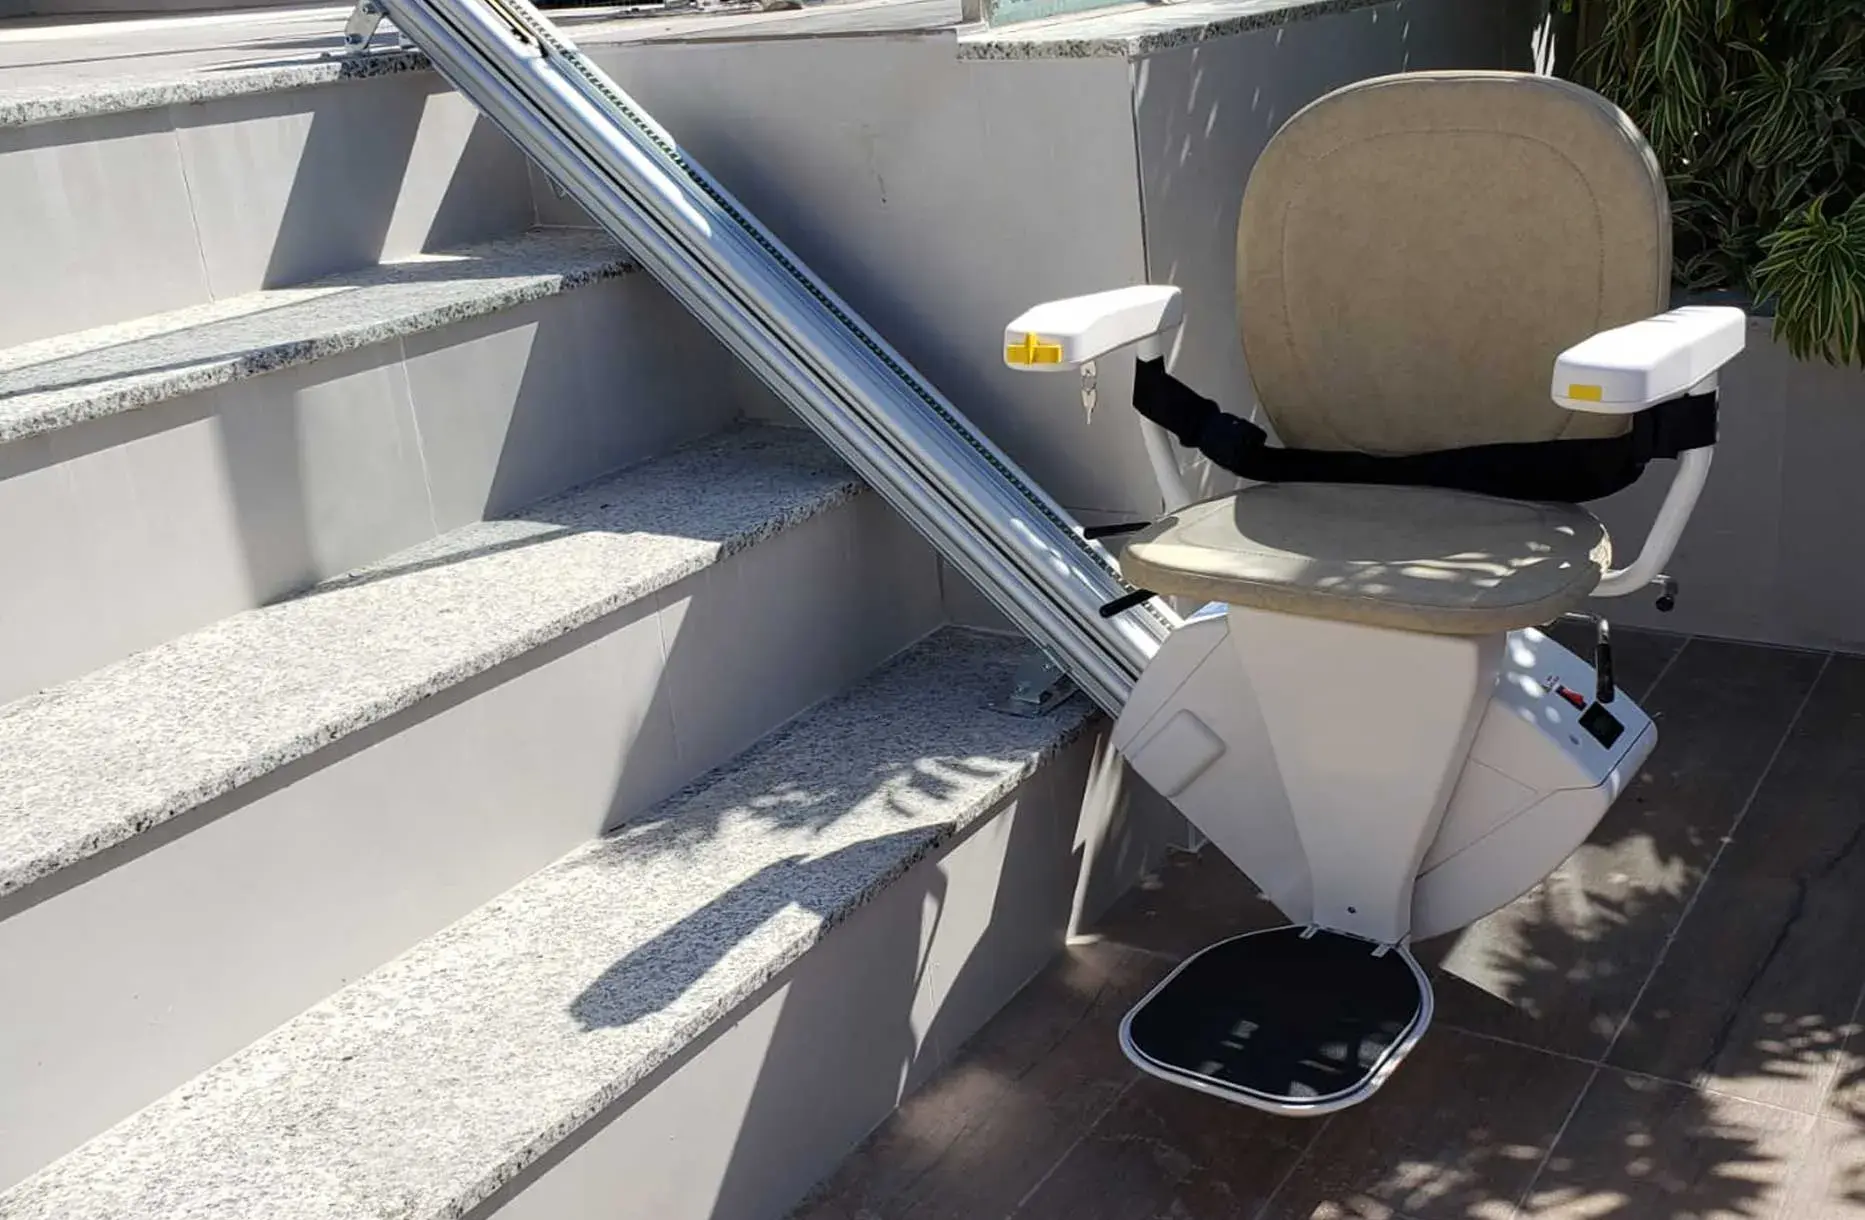 Freedom Stairlifts Outdoor Straight Stairlift in natural stone colour upholstery at the foot of four external steps